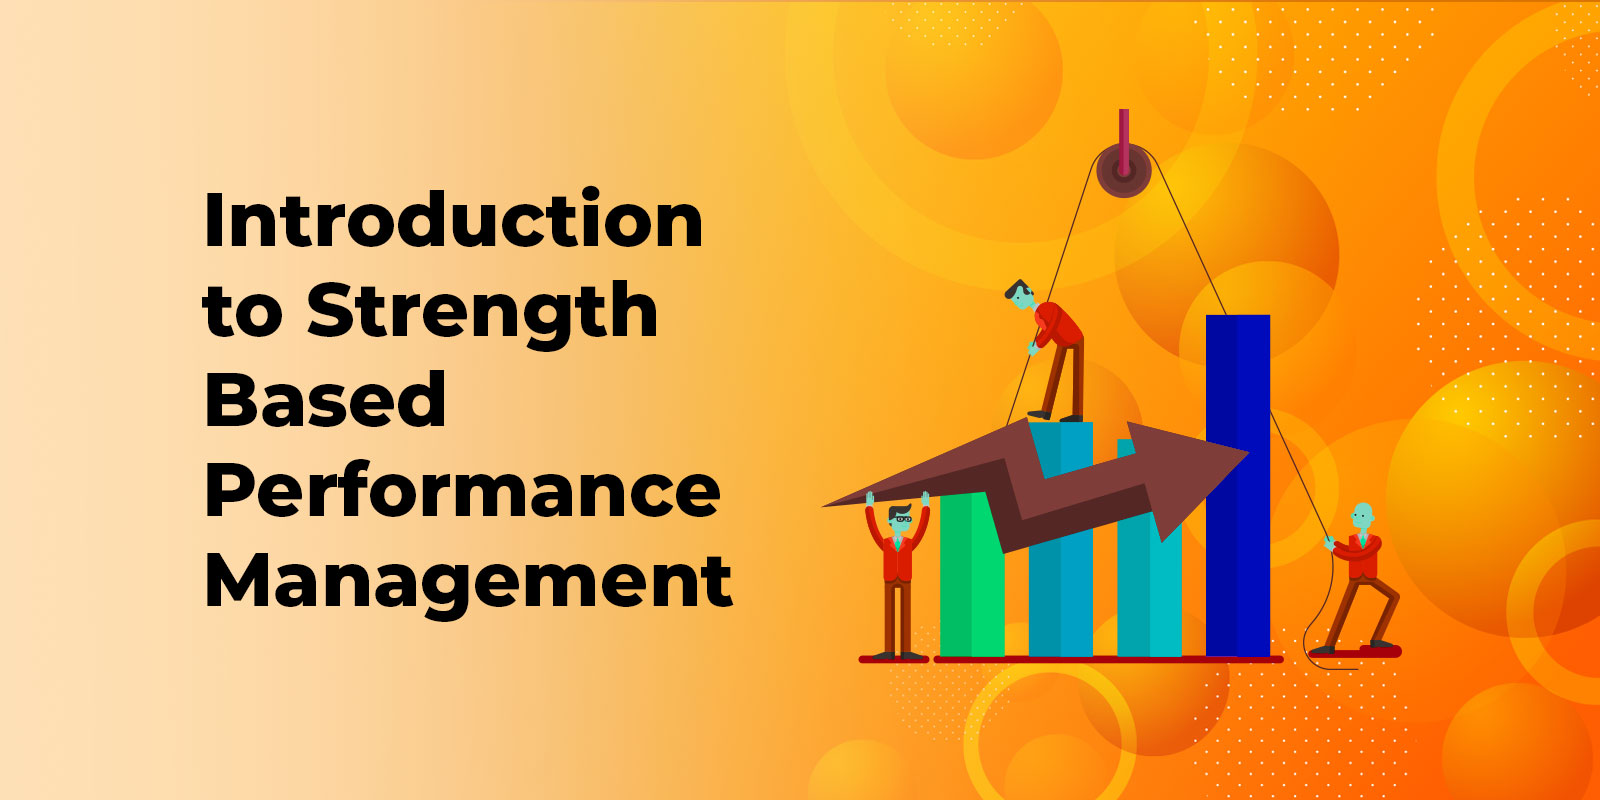 Introduction to Strength Based Performance Management